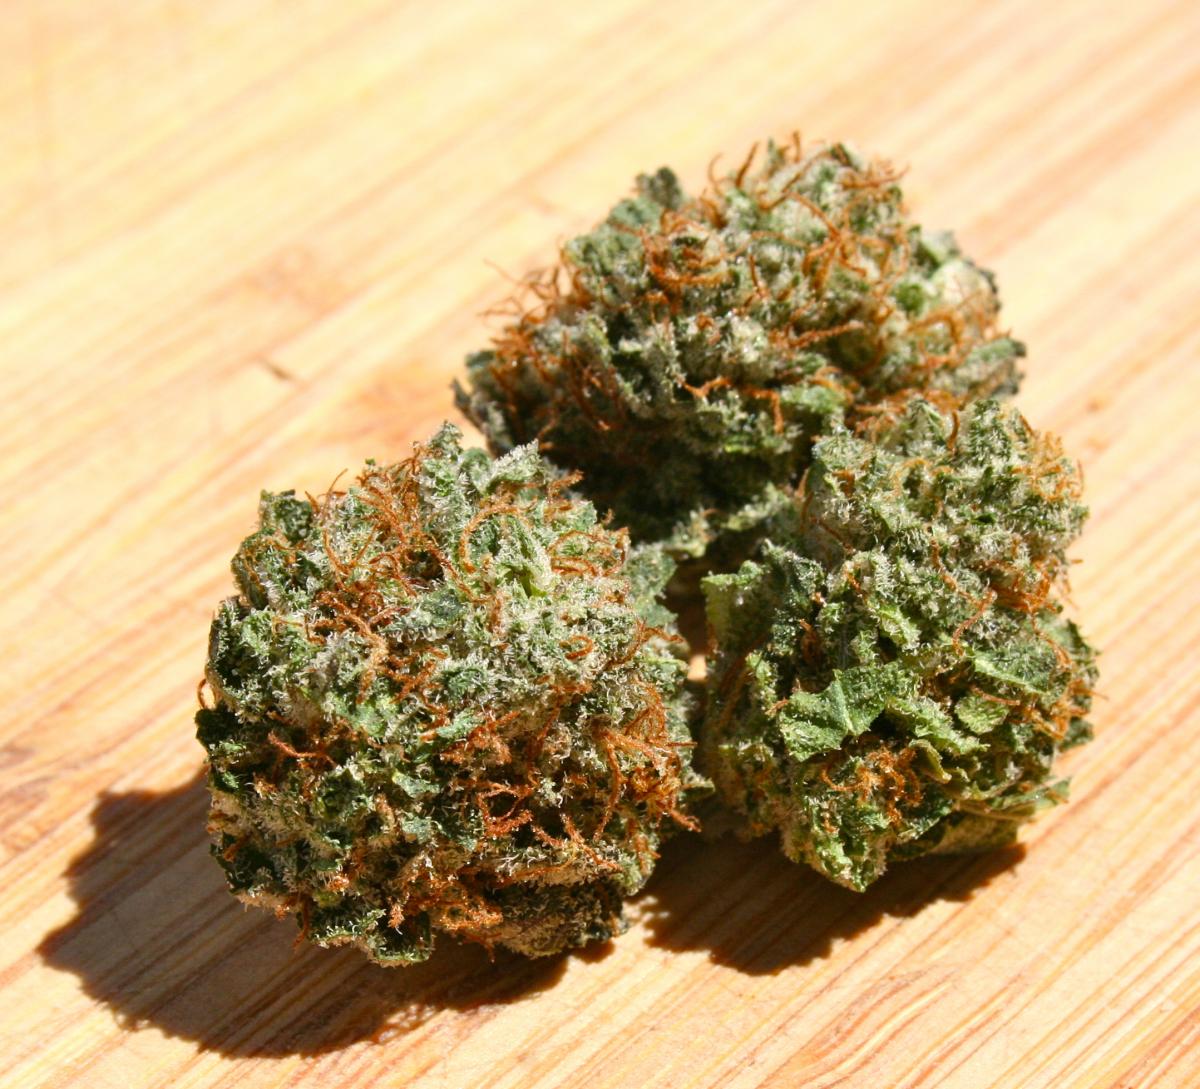 Durban Cookies is the Durban Poison-dominant phenotype of Girl Scout Cookie...